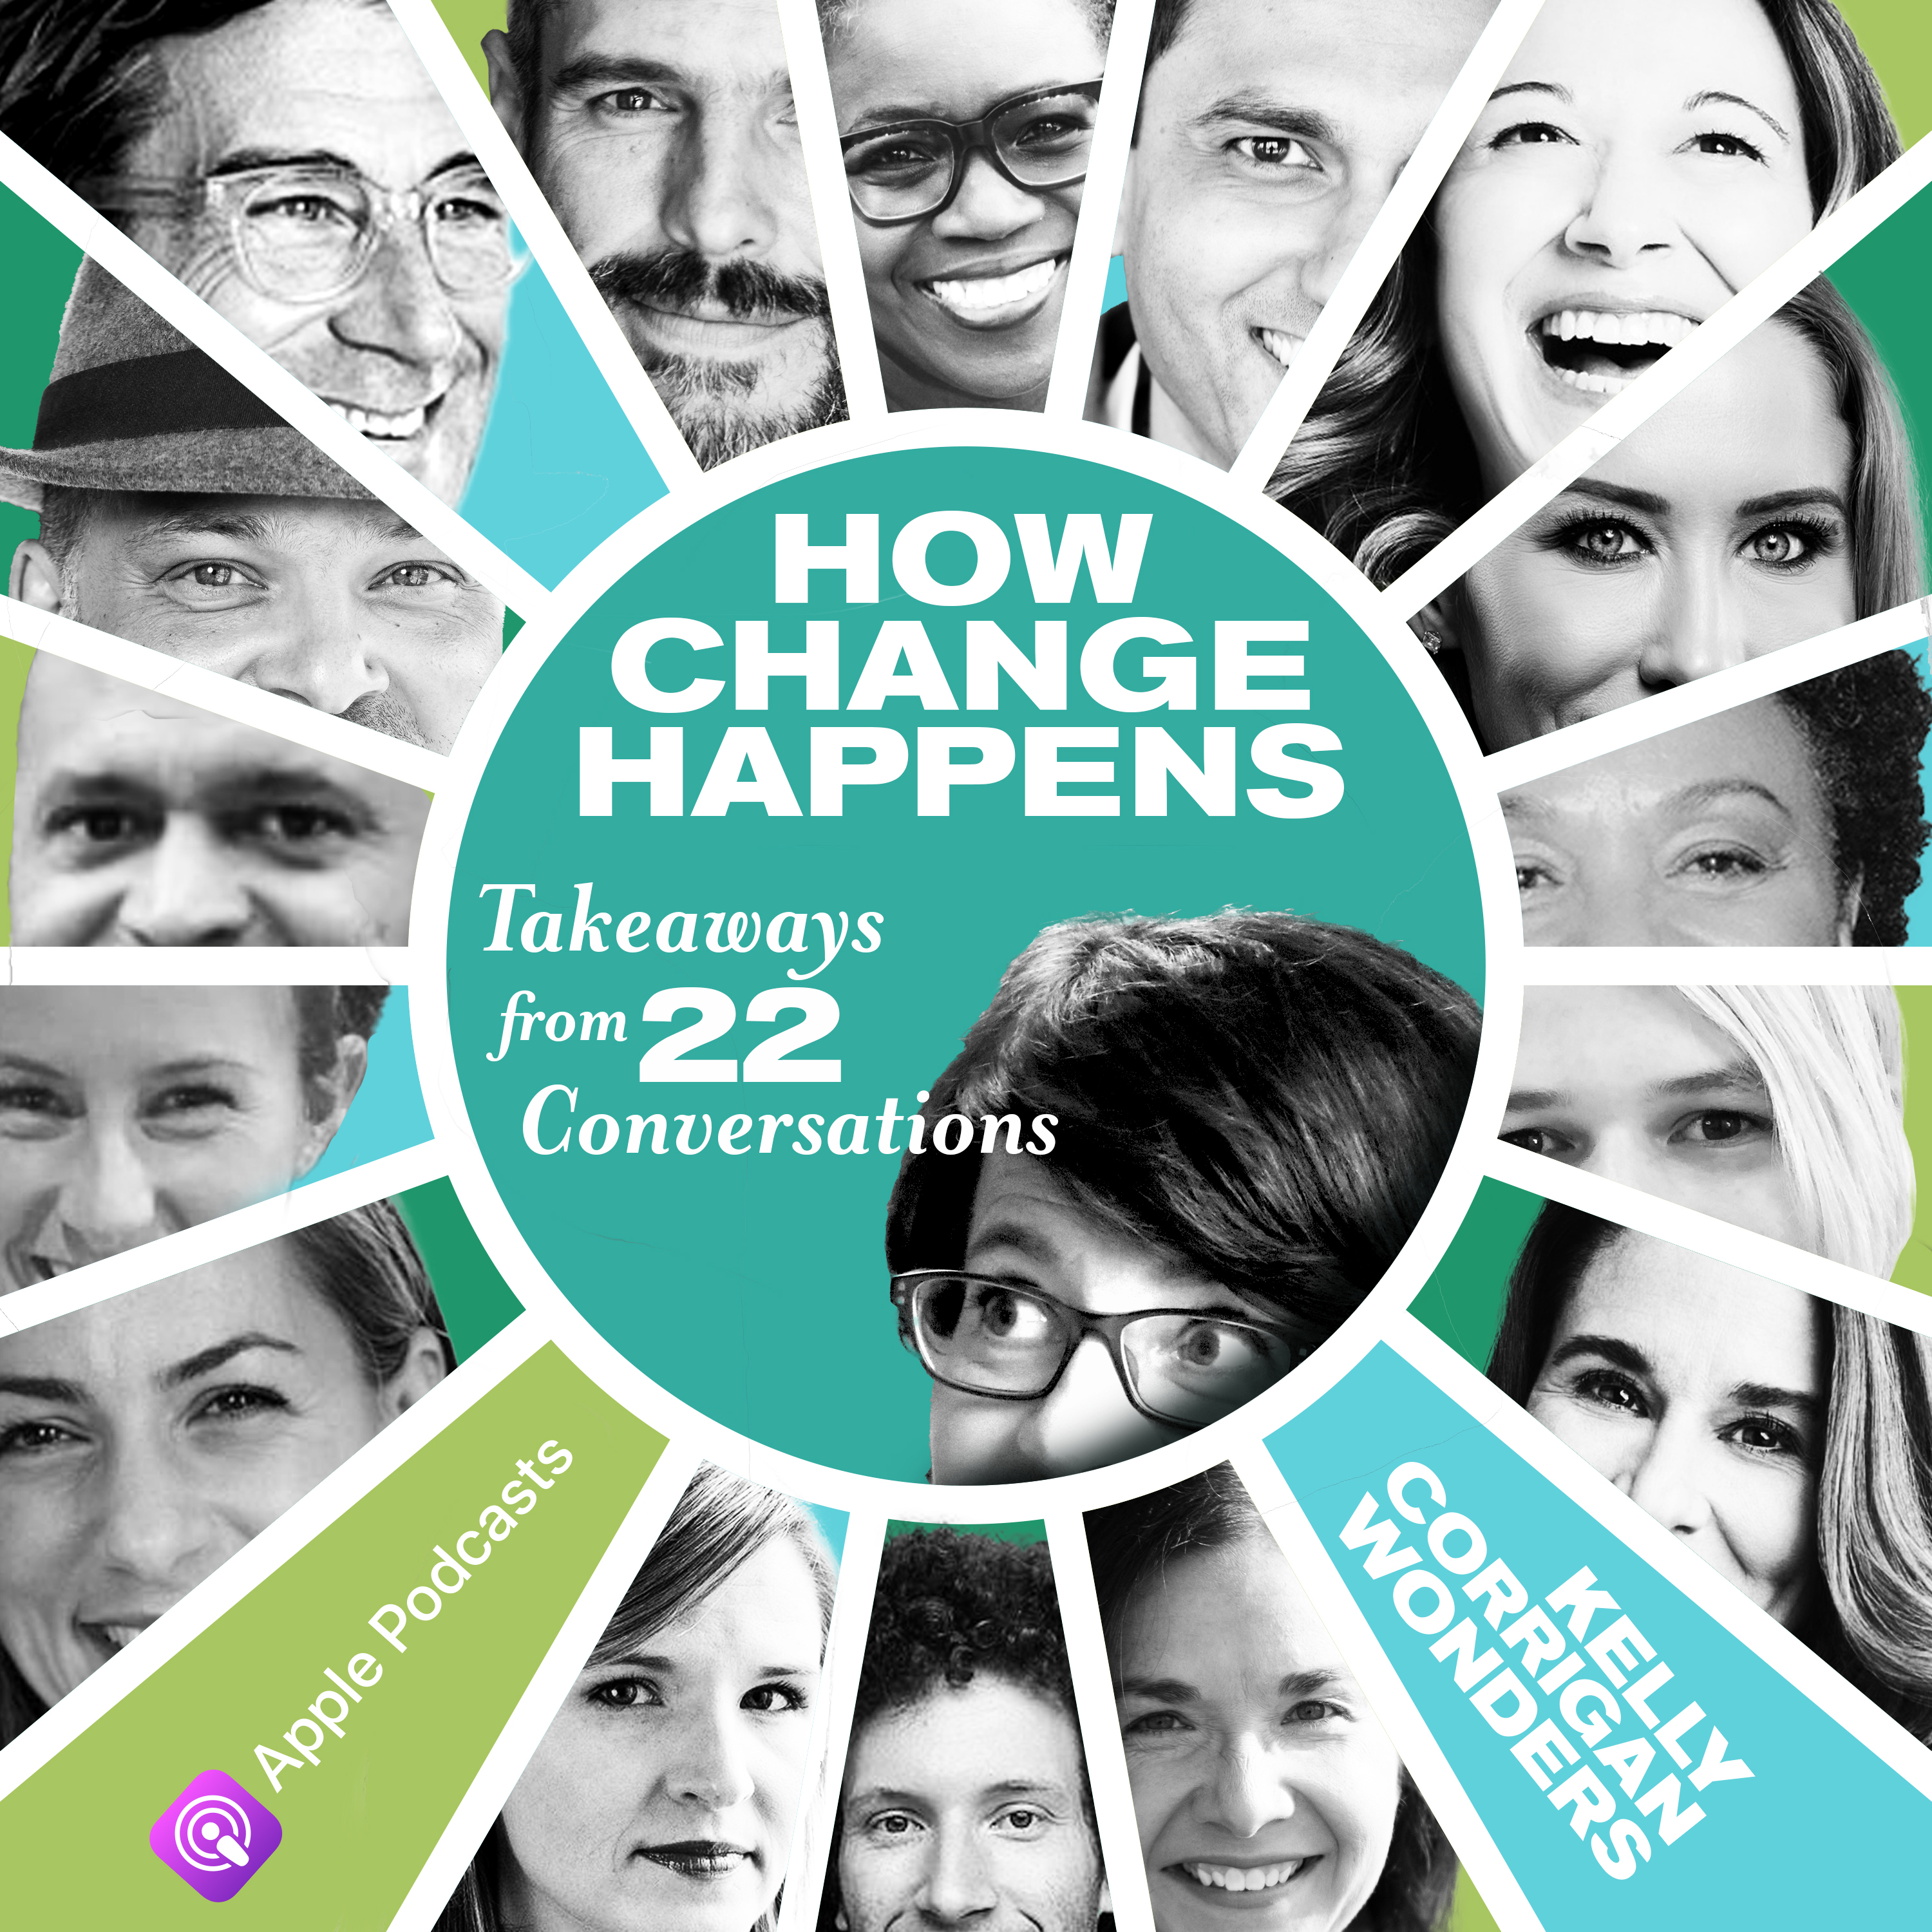 How Change Happens: Takeaways from 22 Conversations